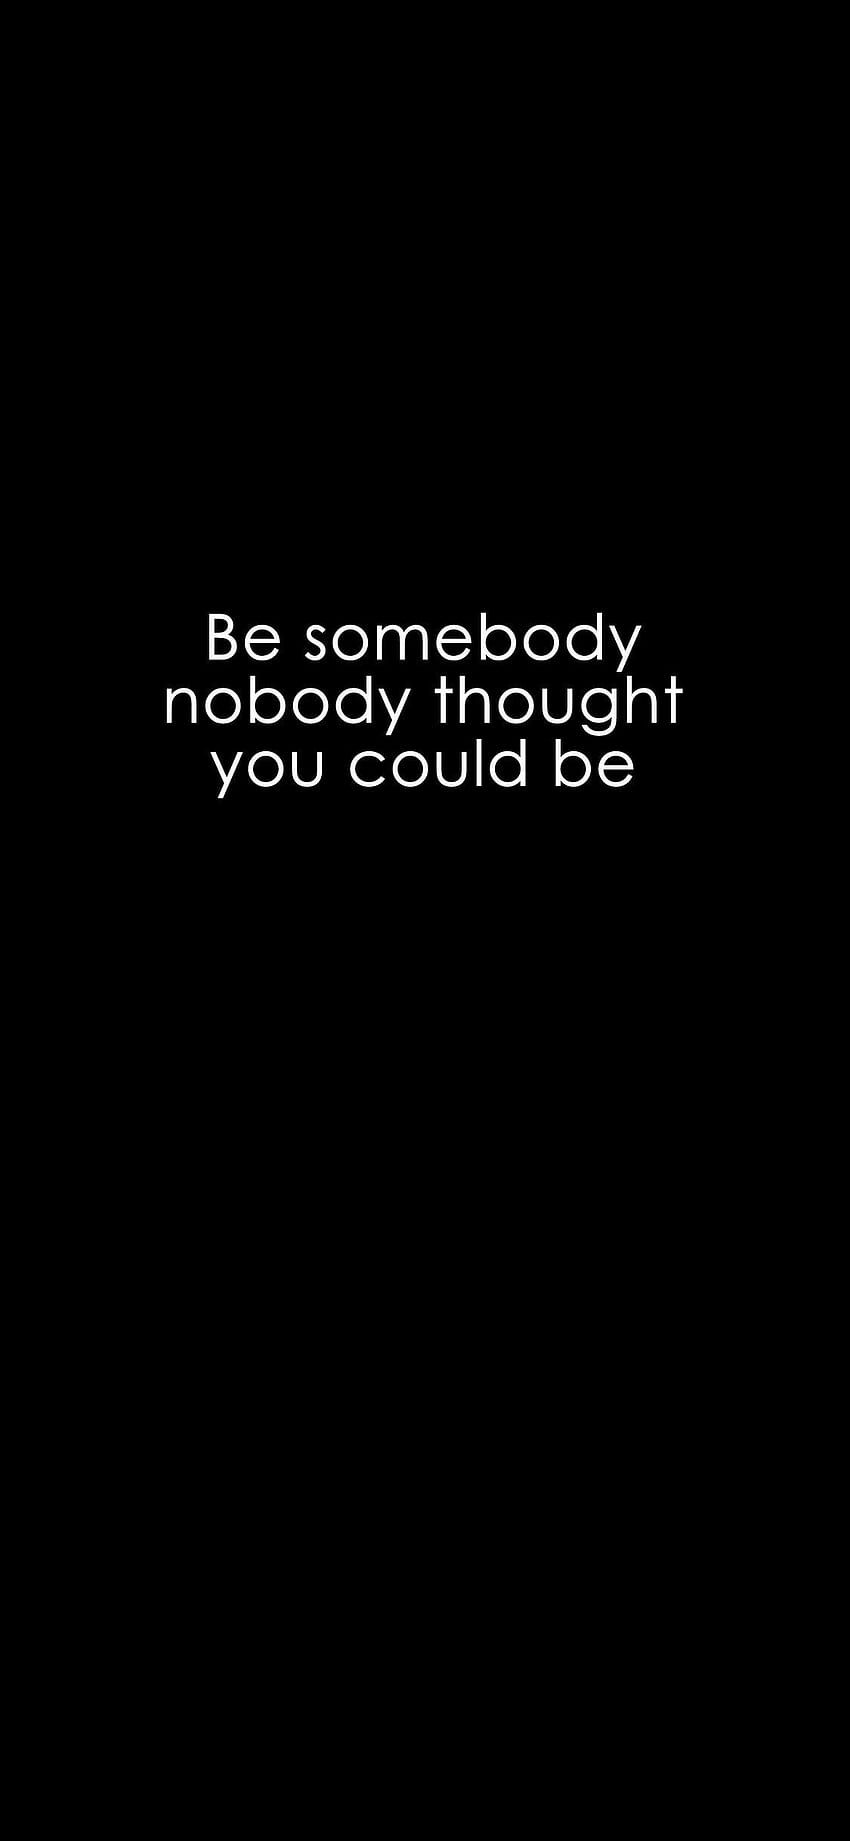 Be somebody nobody thought you could be. HD phone wallpaper